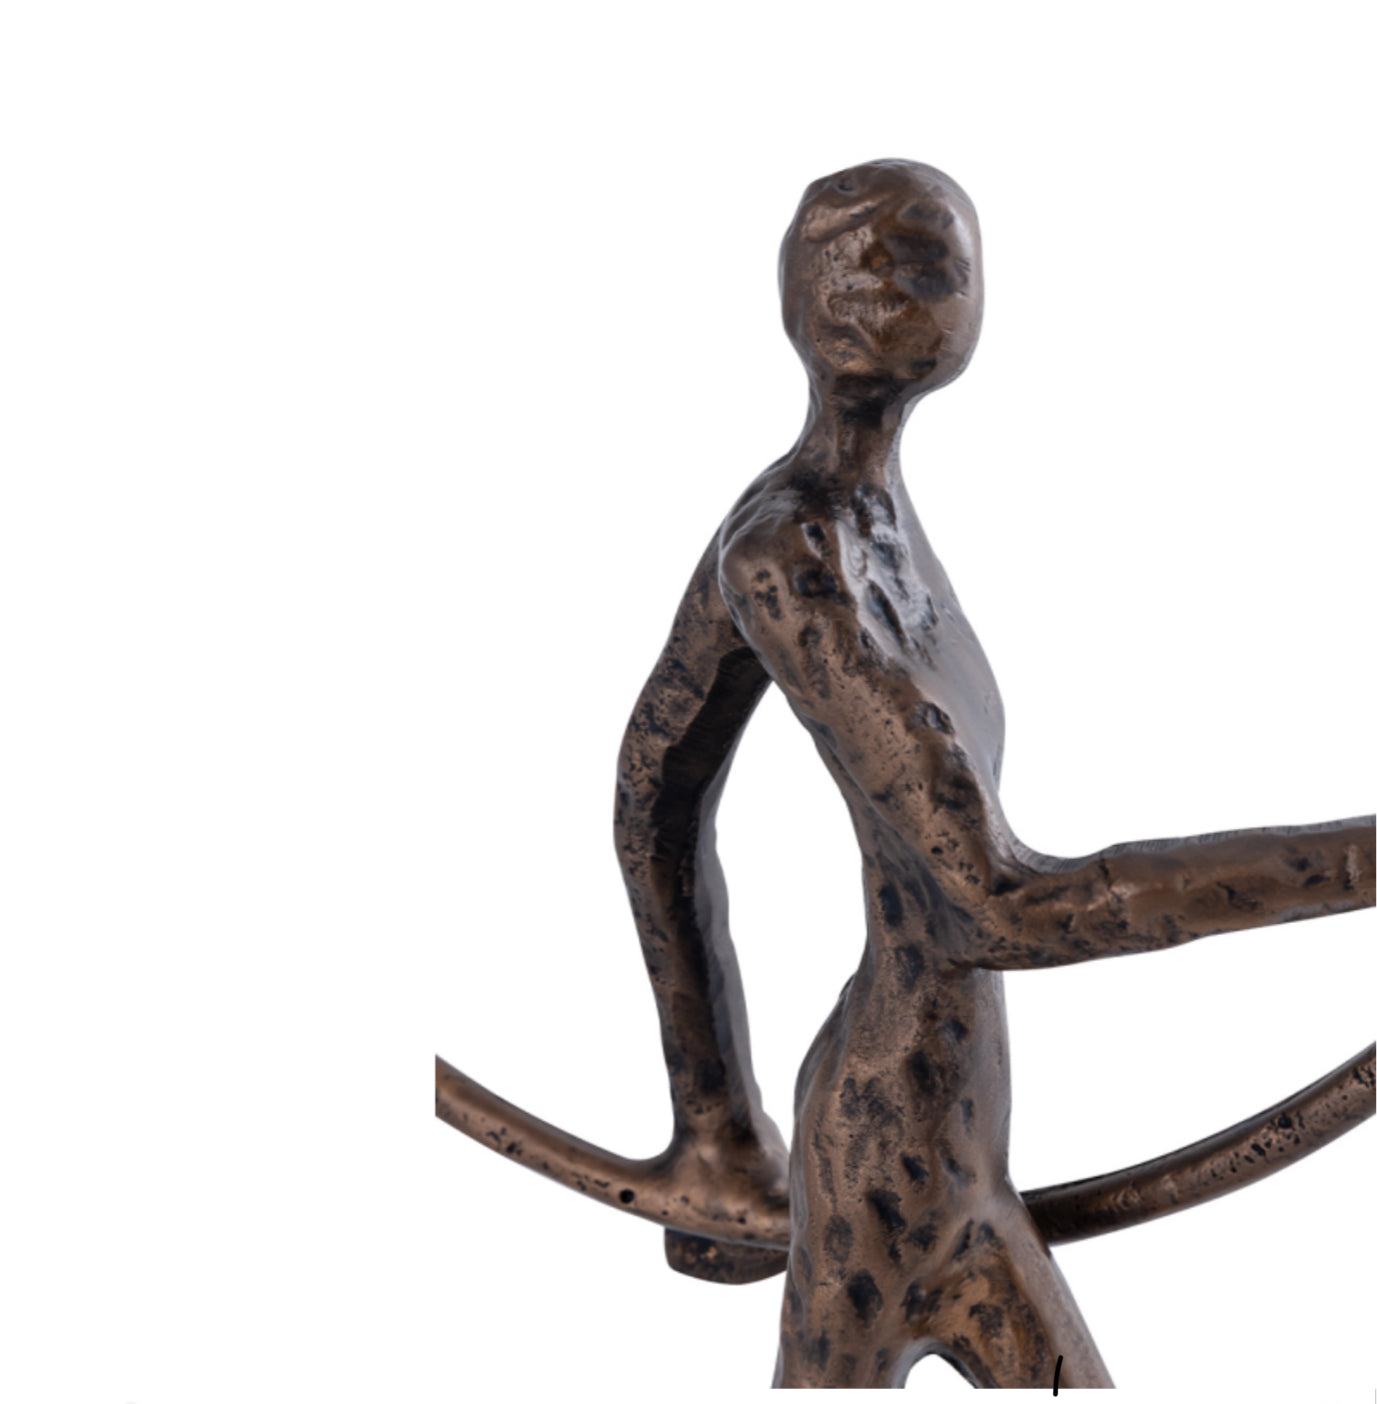 54 cm Man With A Bronze Ring Metal Sculpture